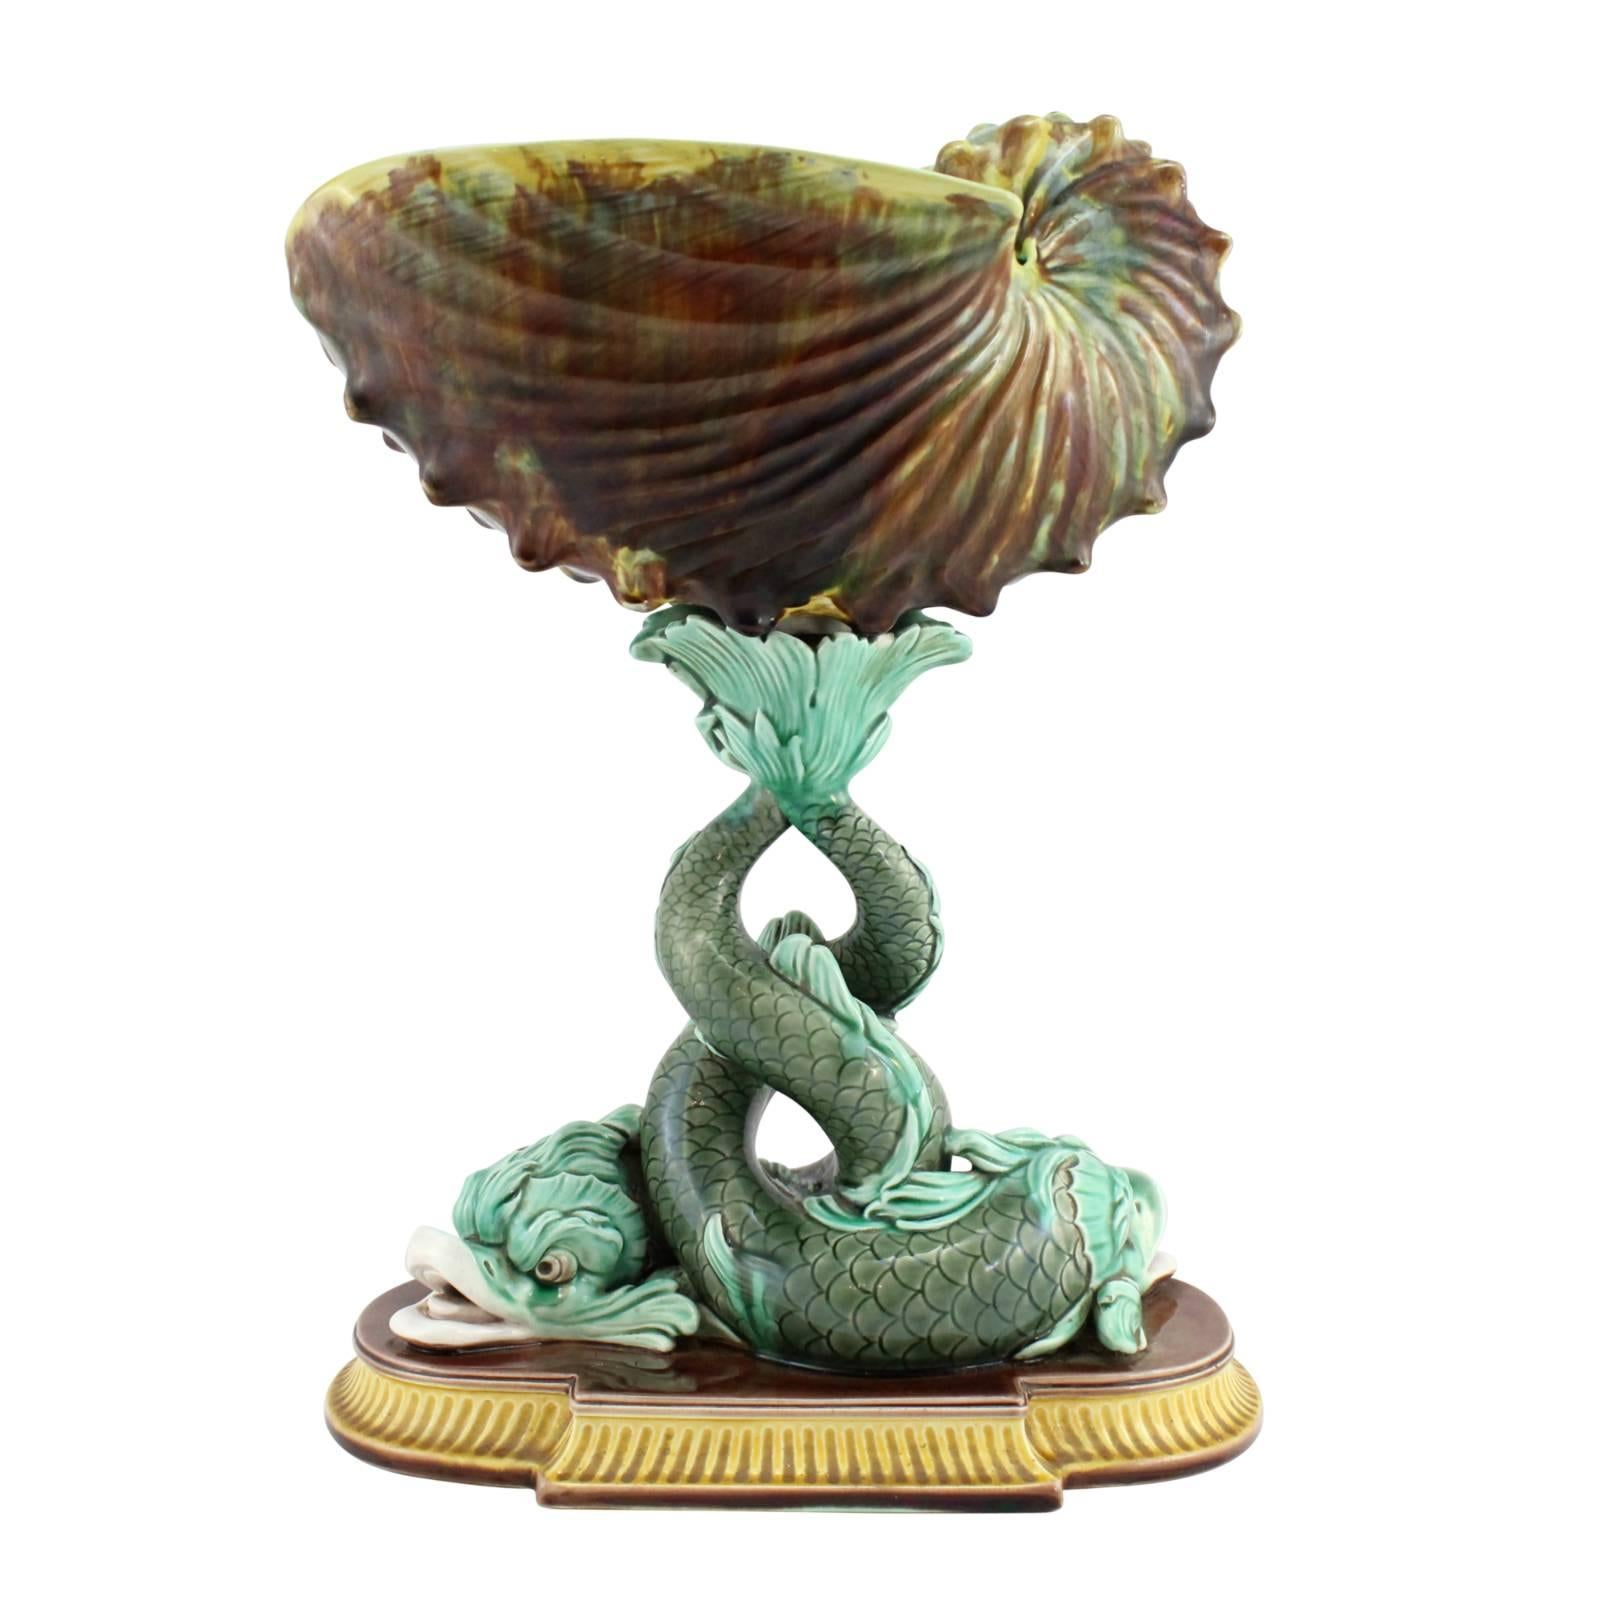 English 19th Century Majolica Centerpiece by Wedgwood